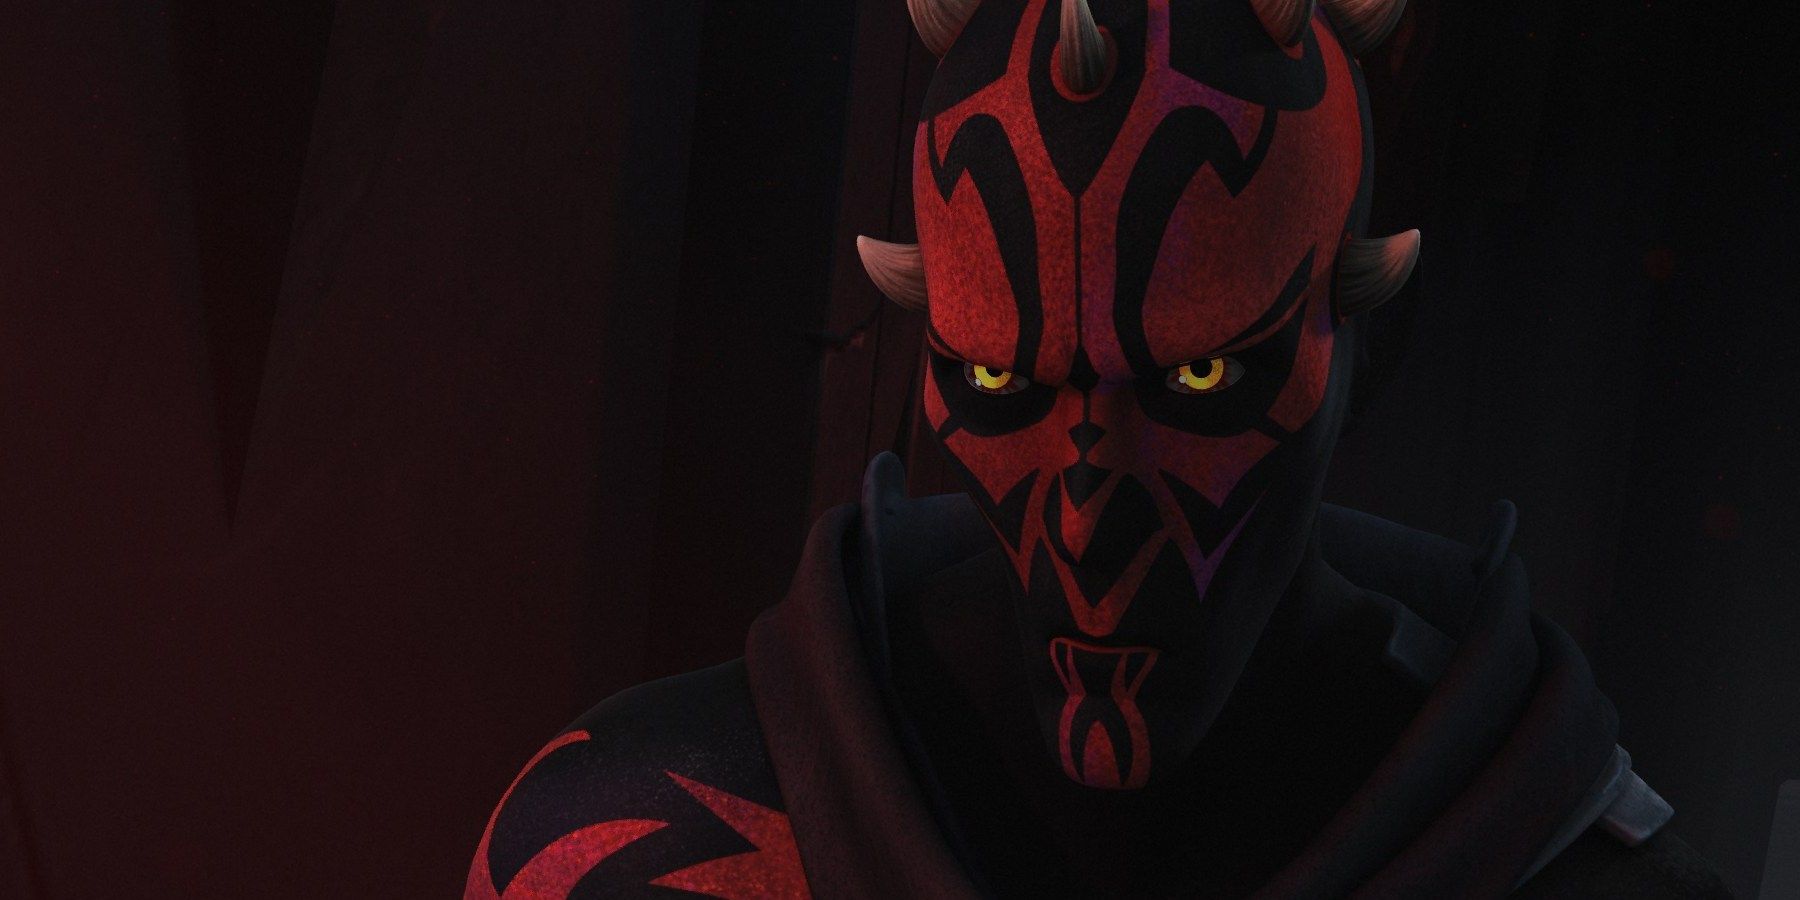 Maul from Star Wars Rebels